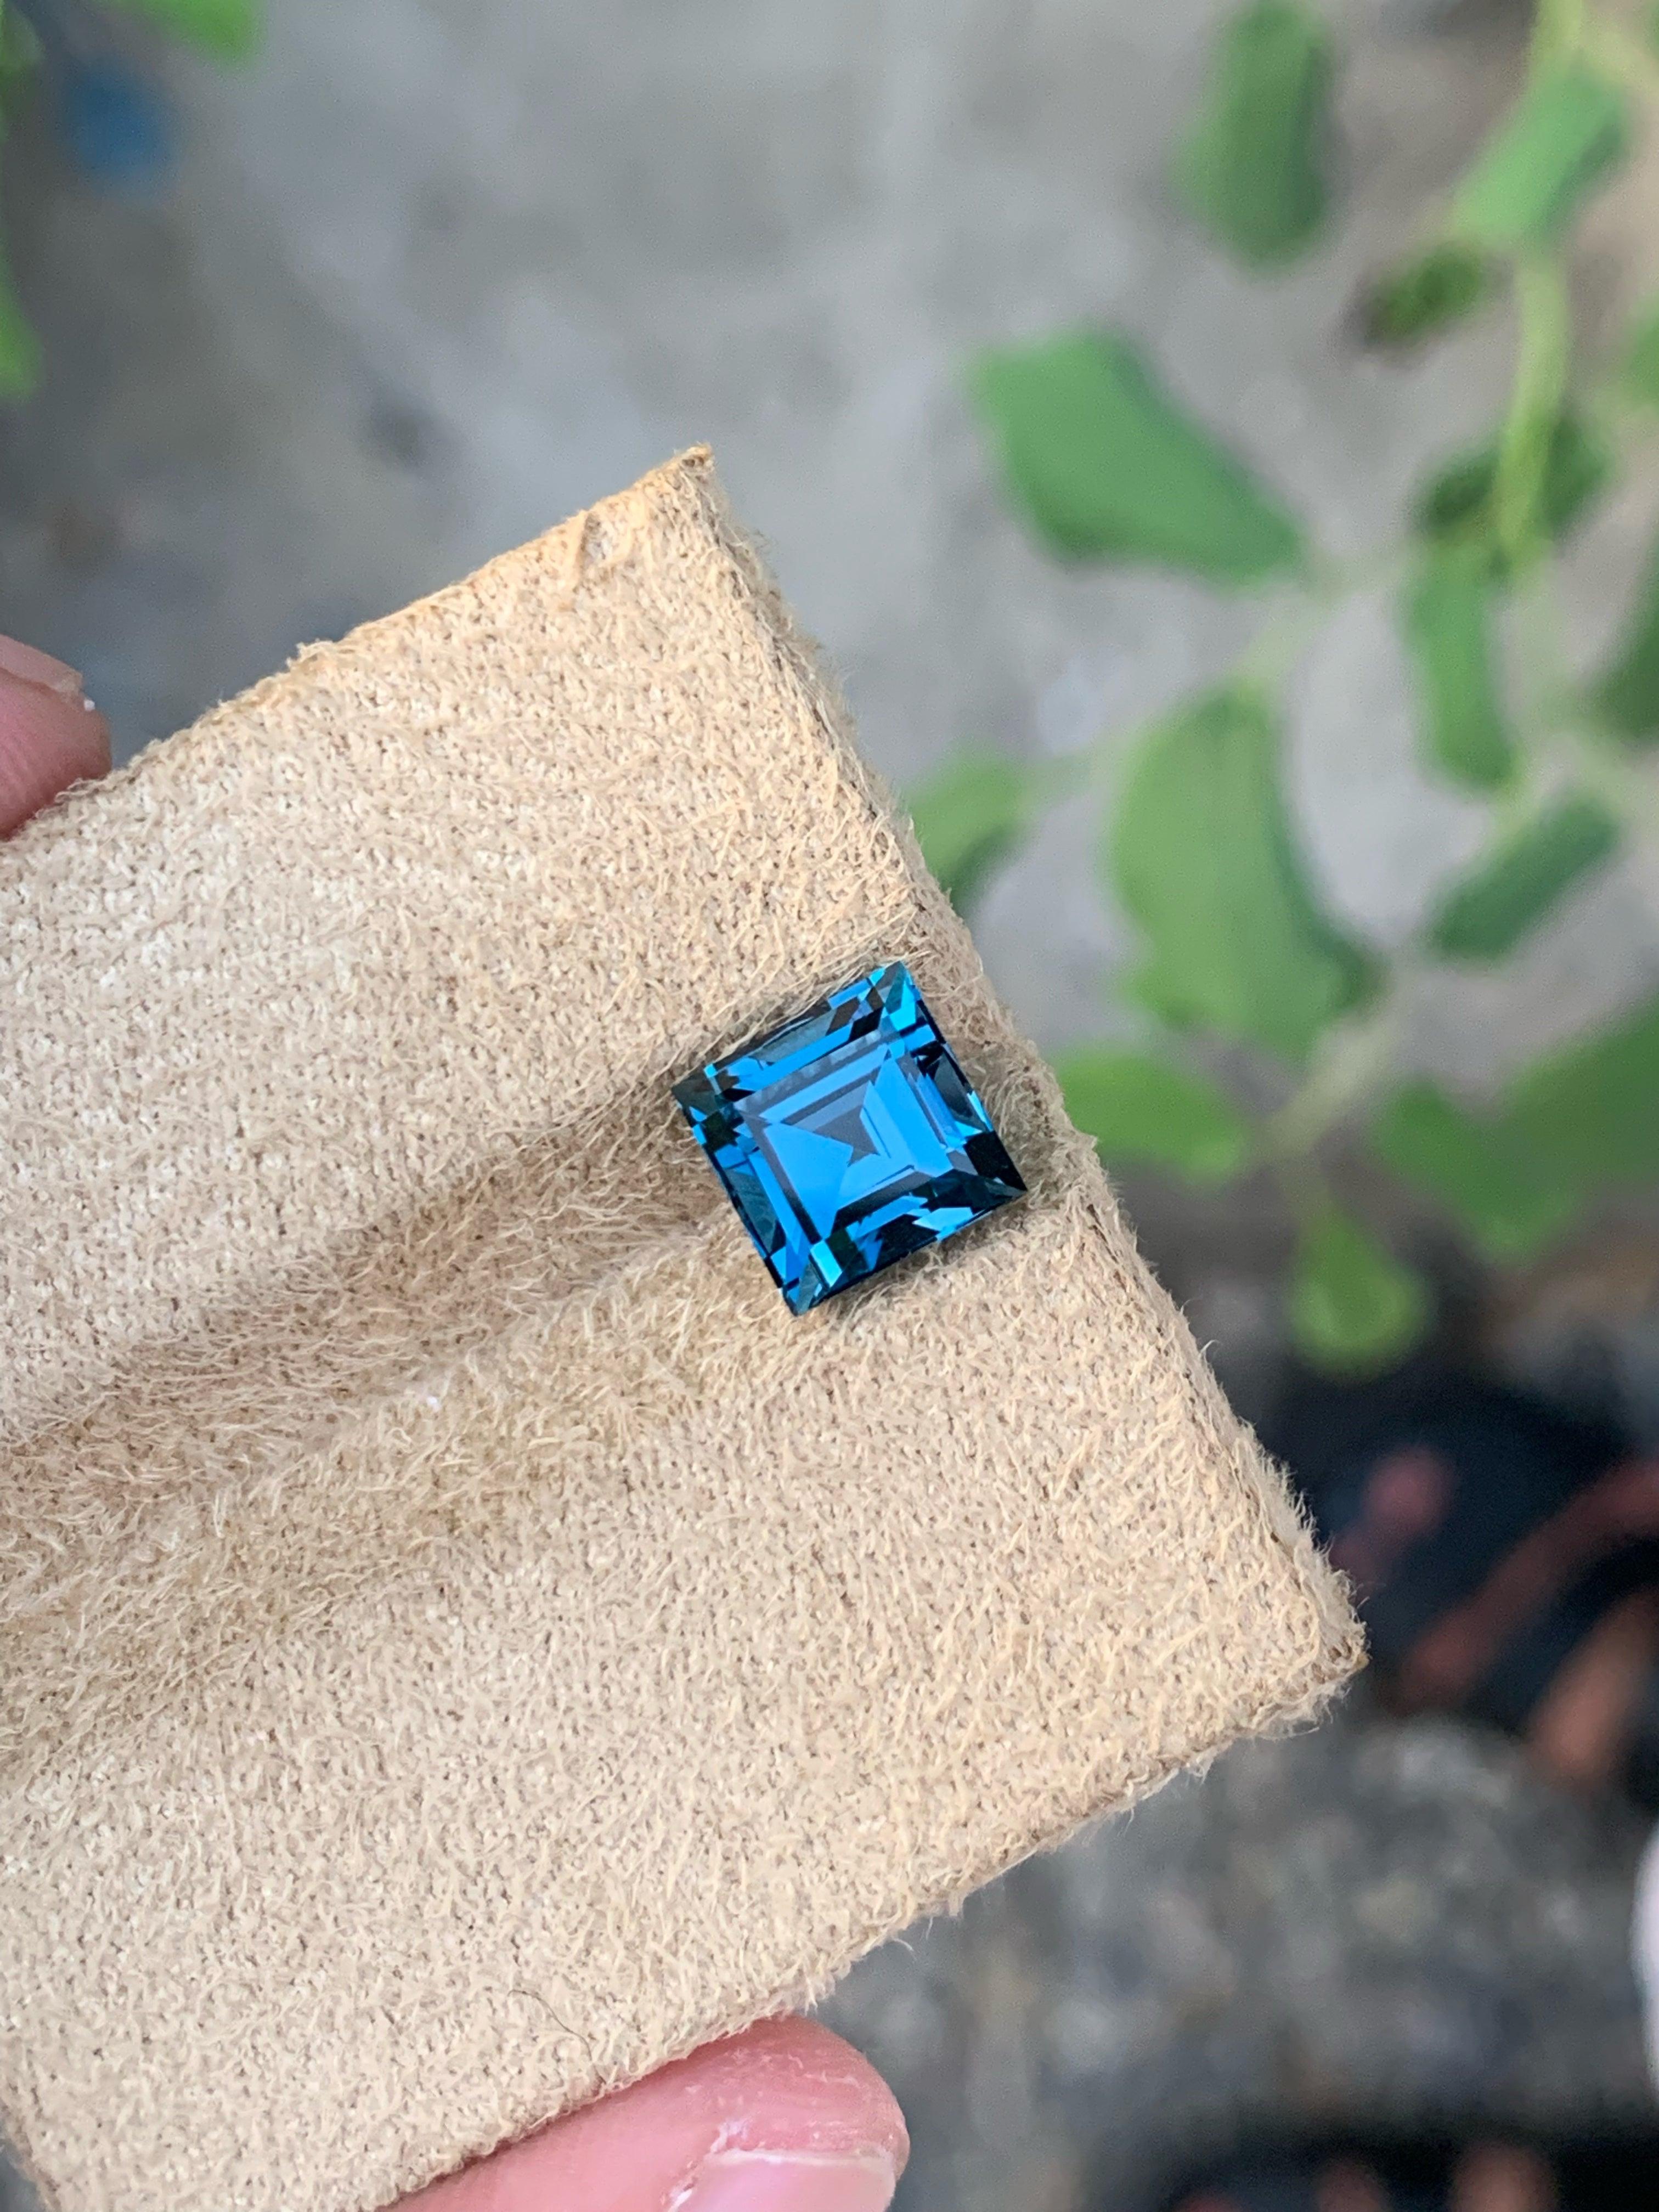 Outstanding Bright London Blue Topaz Gemstone of 3.60 carats from Madagascar has a wonderful cut in a Square shape, incredible Blue color. Great brilliance. This gem is Loupe Clean  Clarity. 

Product Information:
GEMSTONE NAME: Outstanding Bright